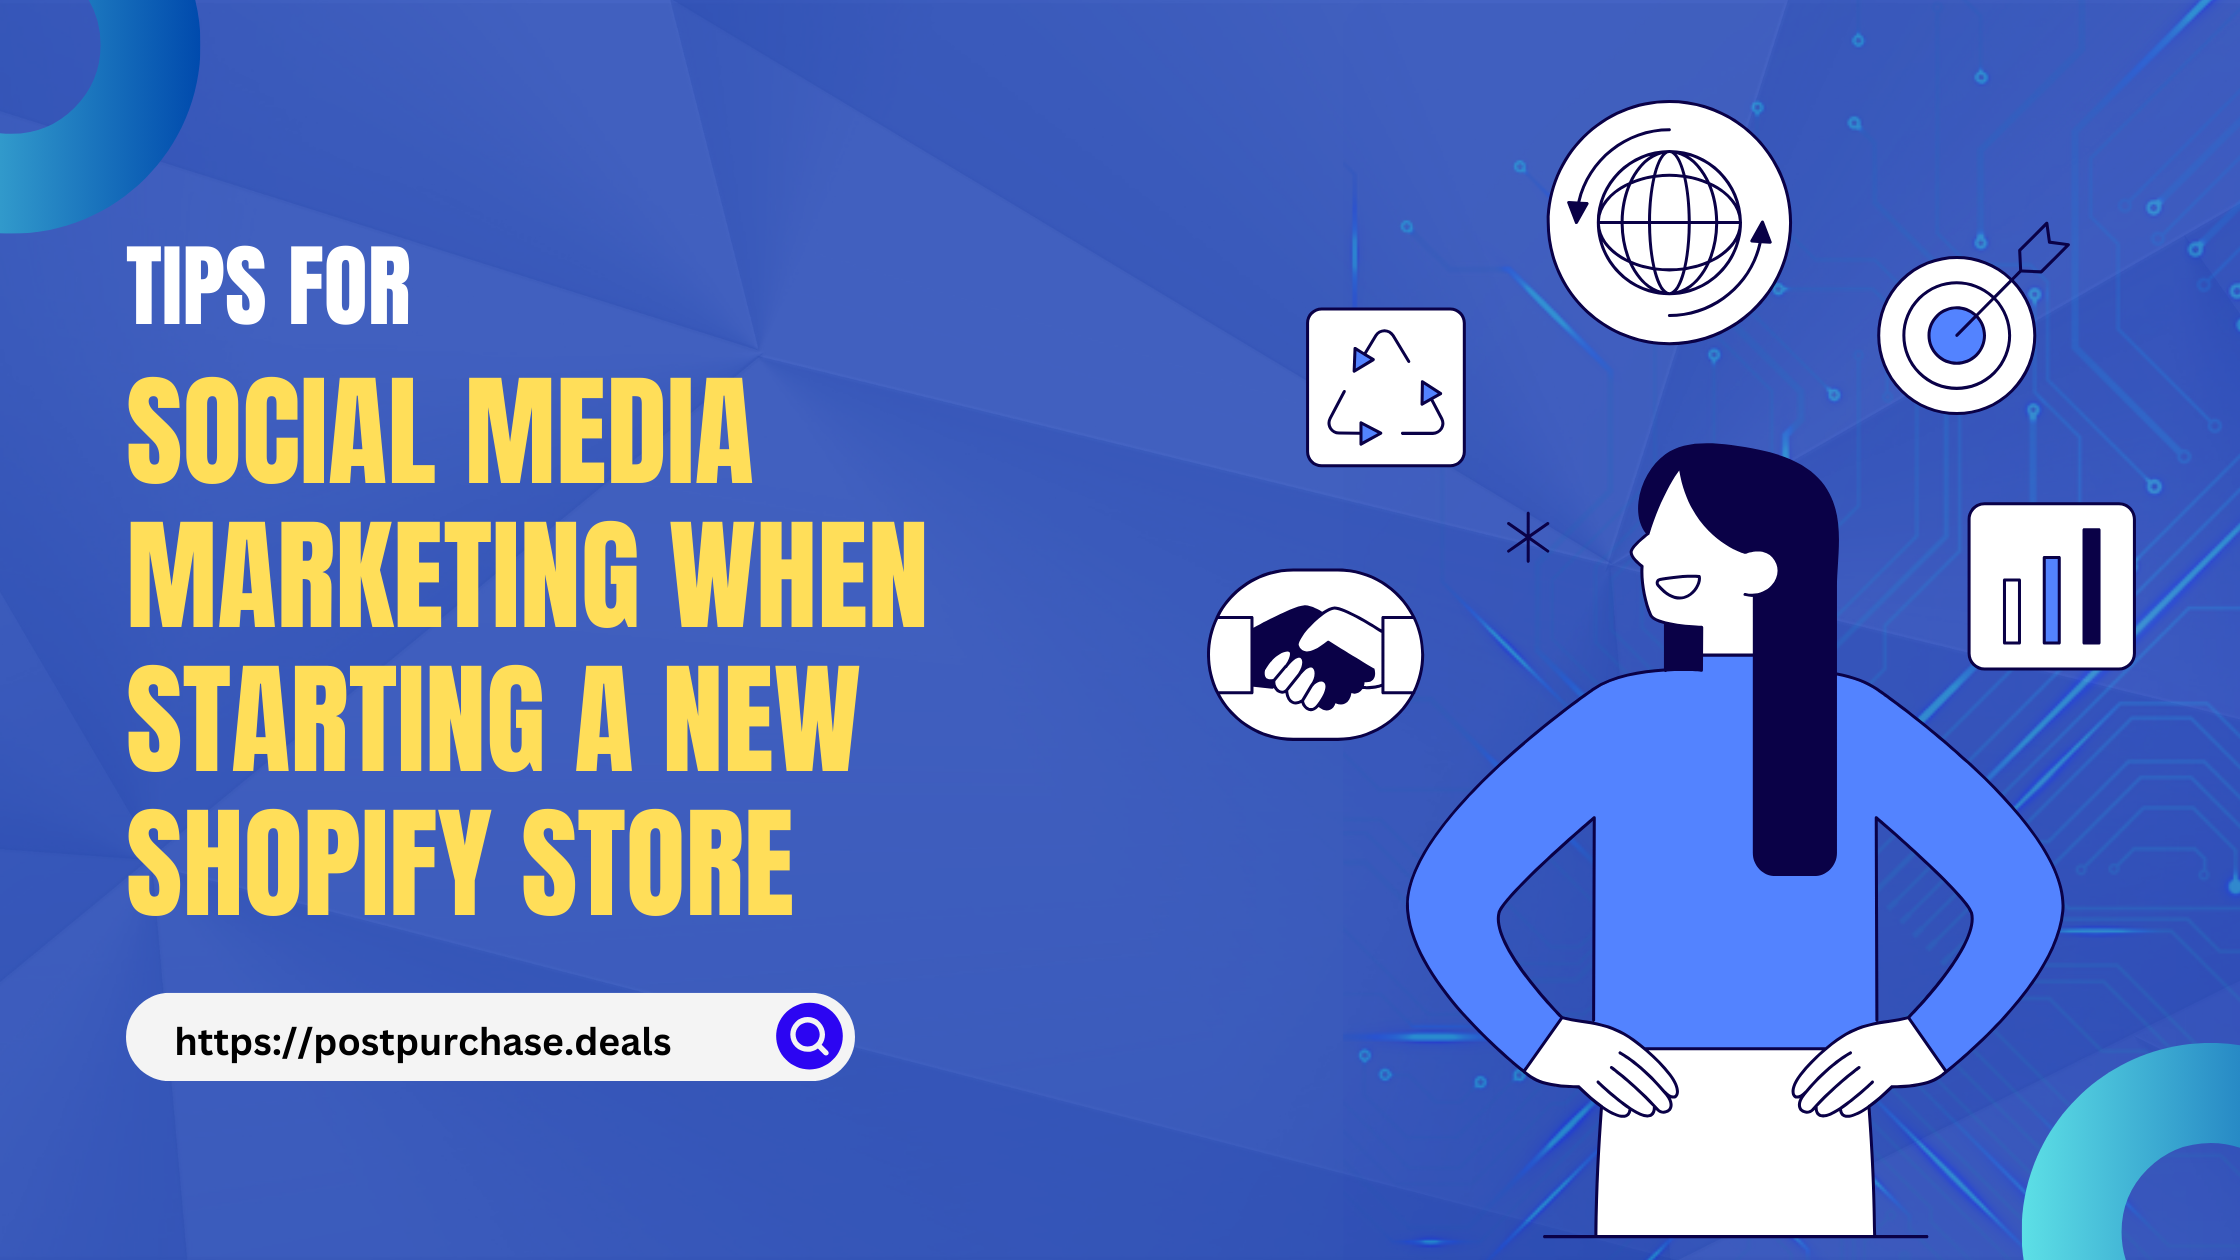 Social Media Marketing When Starting a New Shopify Store